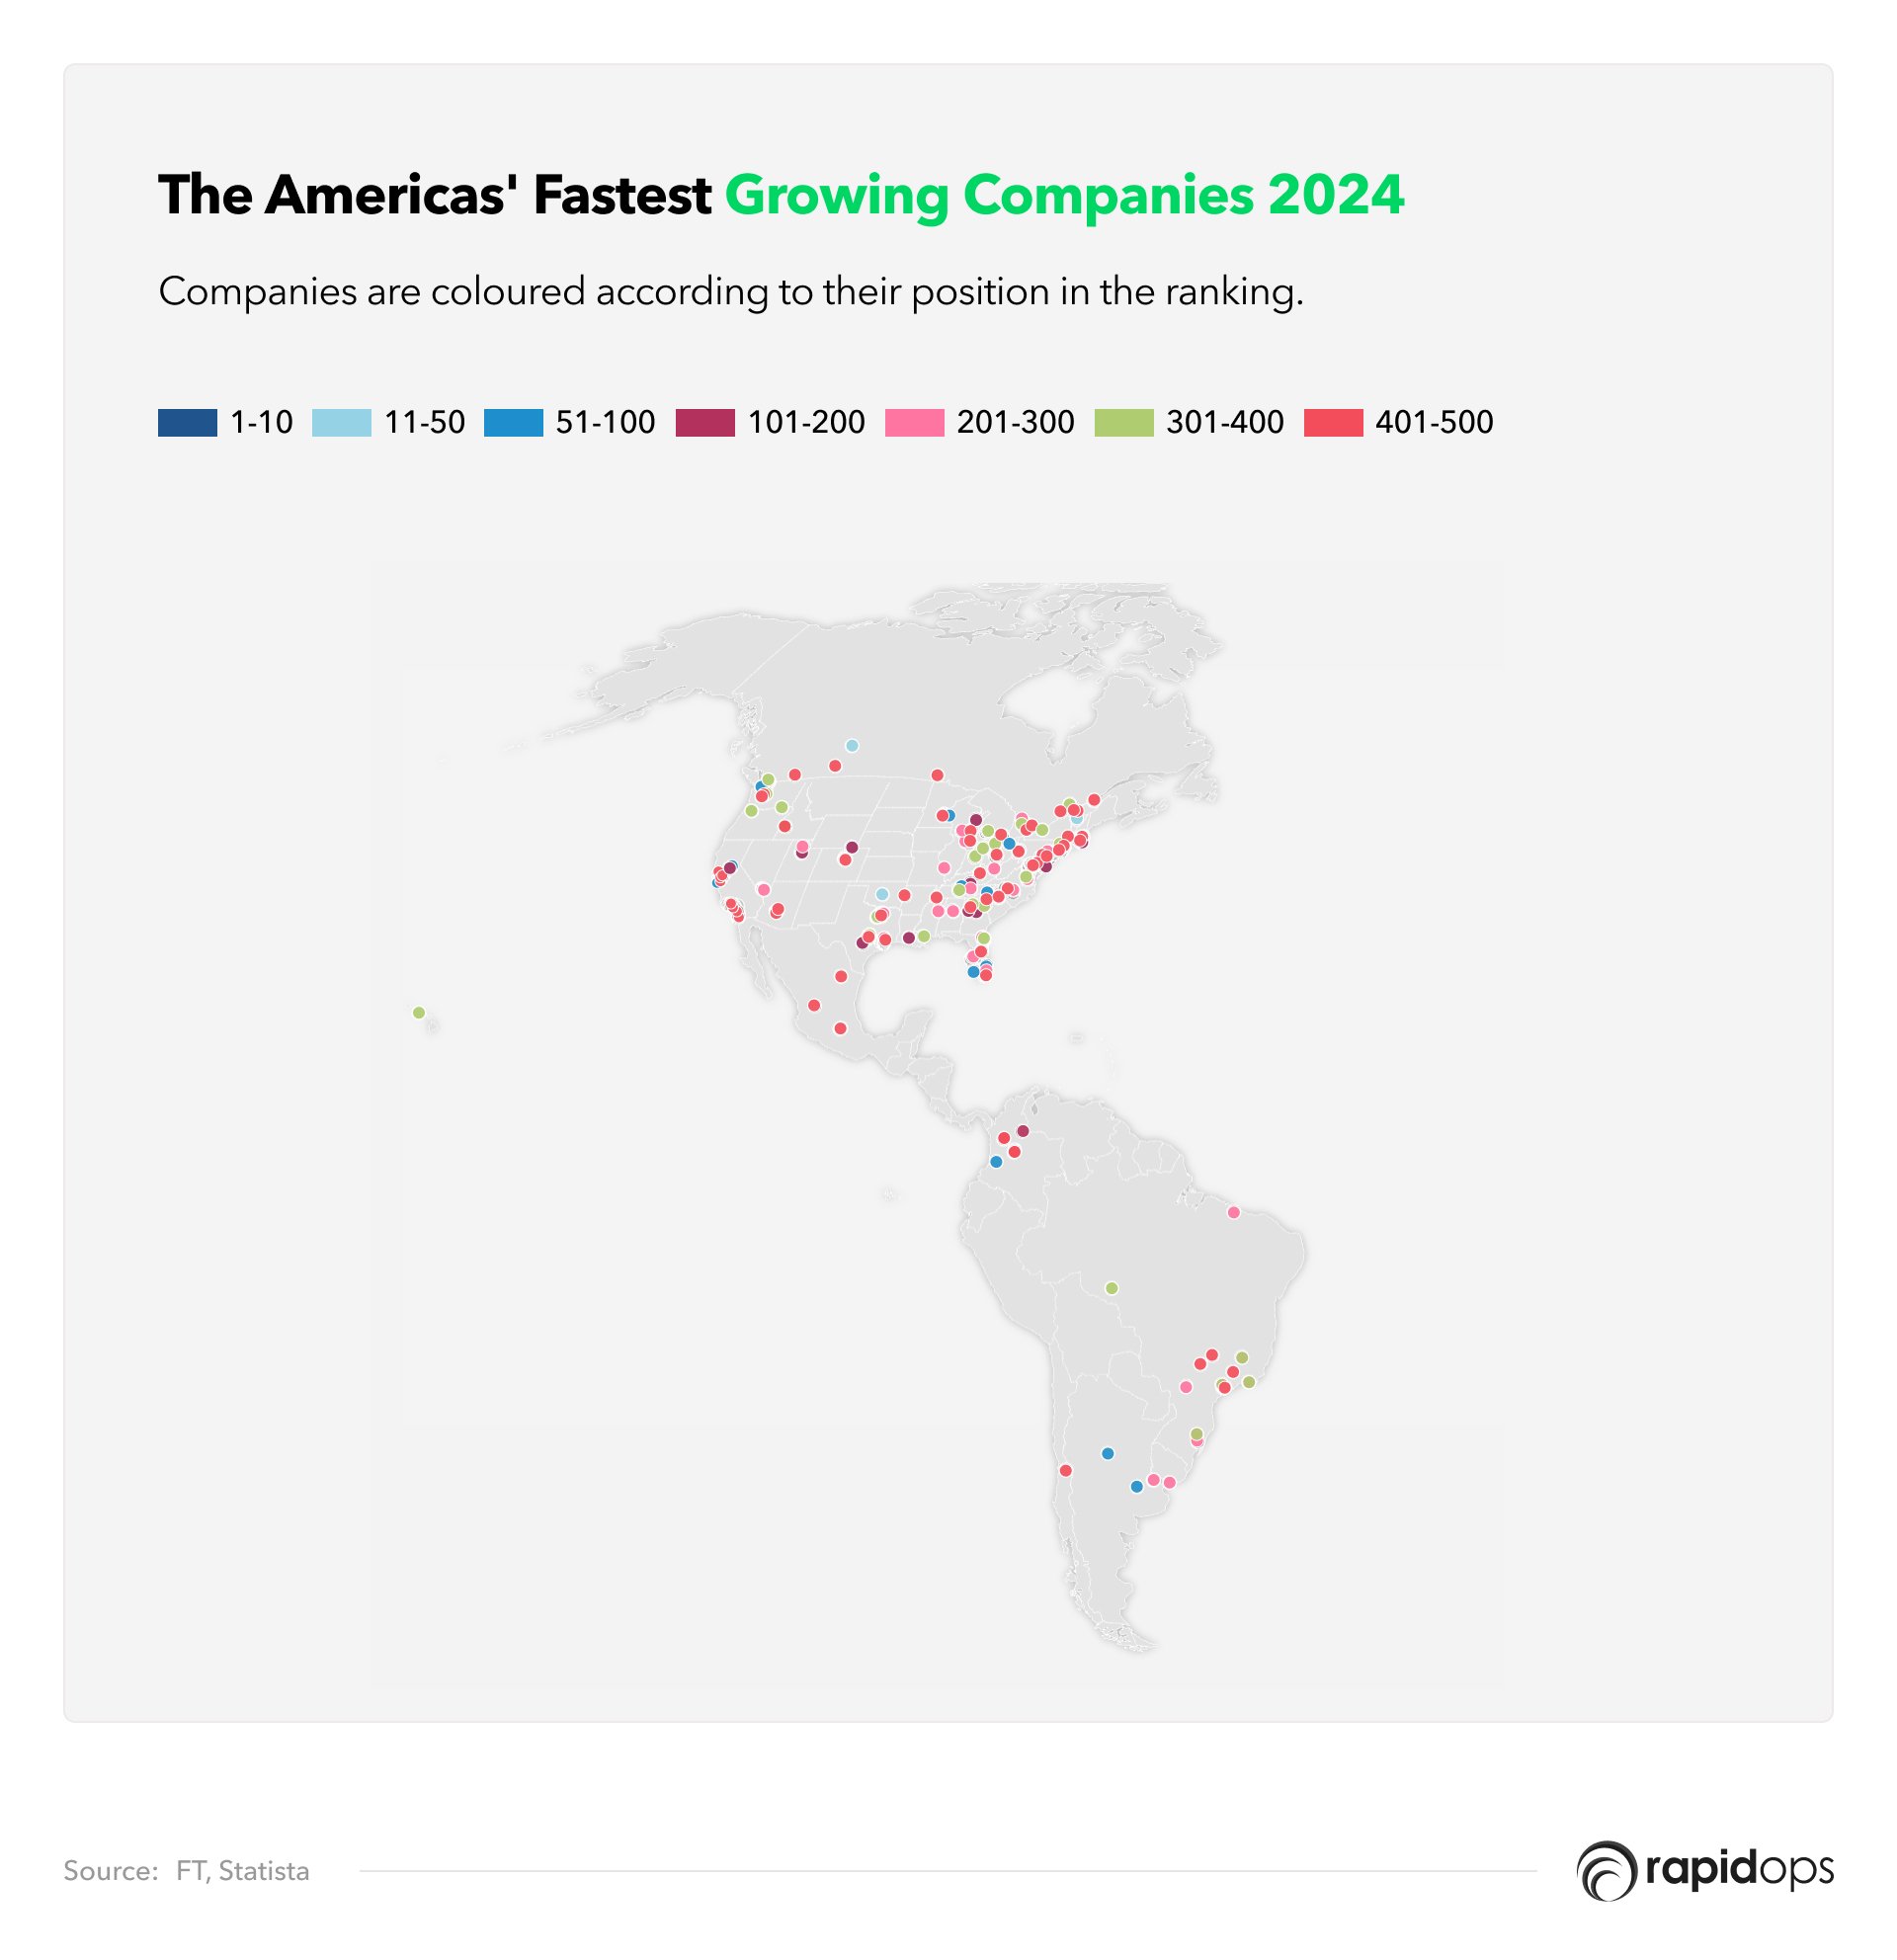 The Americas Fastest Growing Companies 2024 - Map